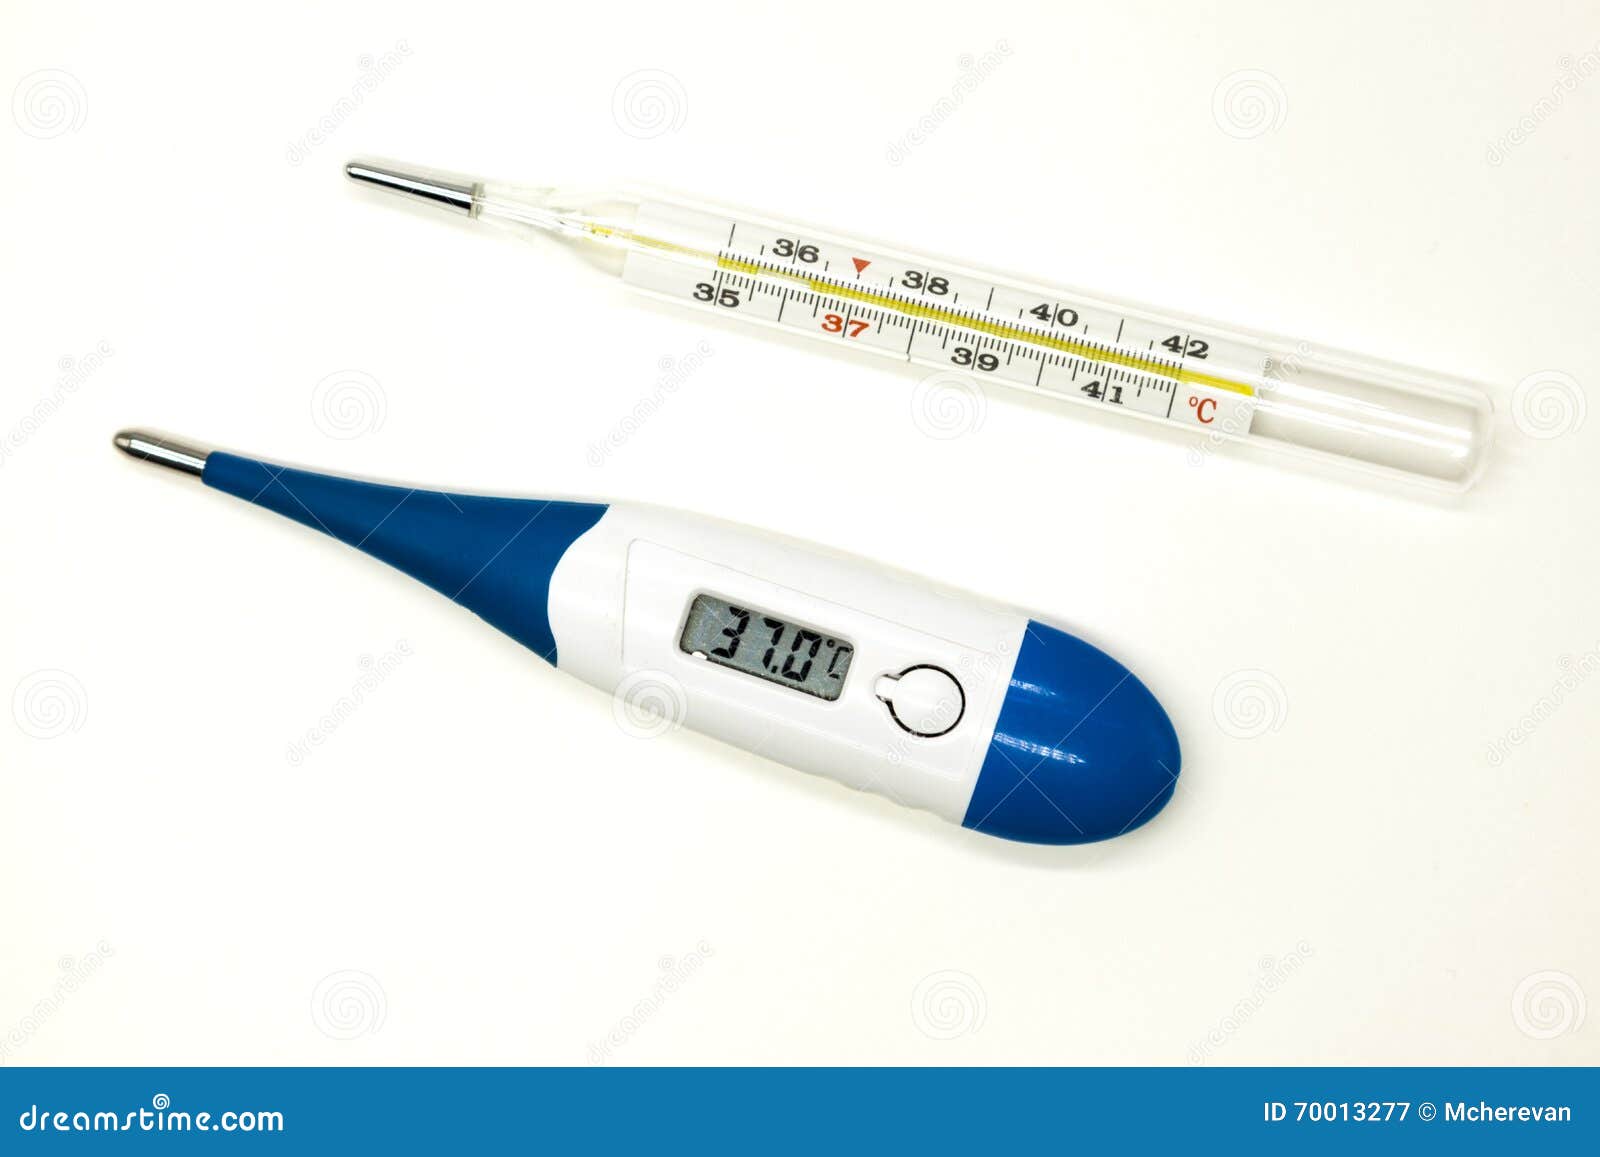 Old Mercury Medical Thermometer and Modern Electronic Thermometer Closeup  on White Background Stock Image - Image of contagious, closeup: 70013277